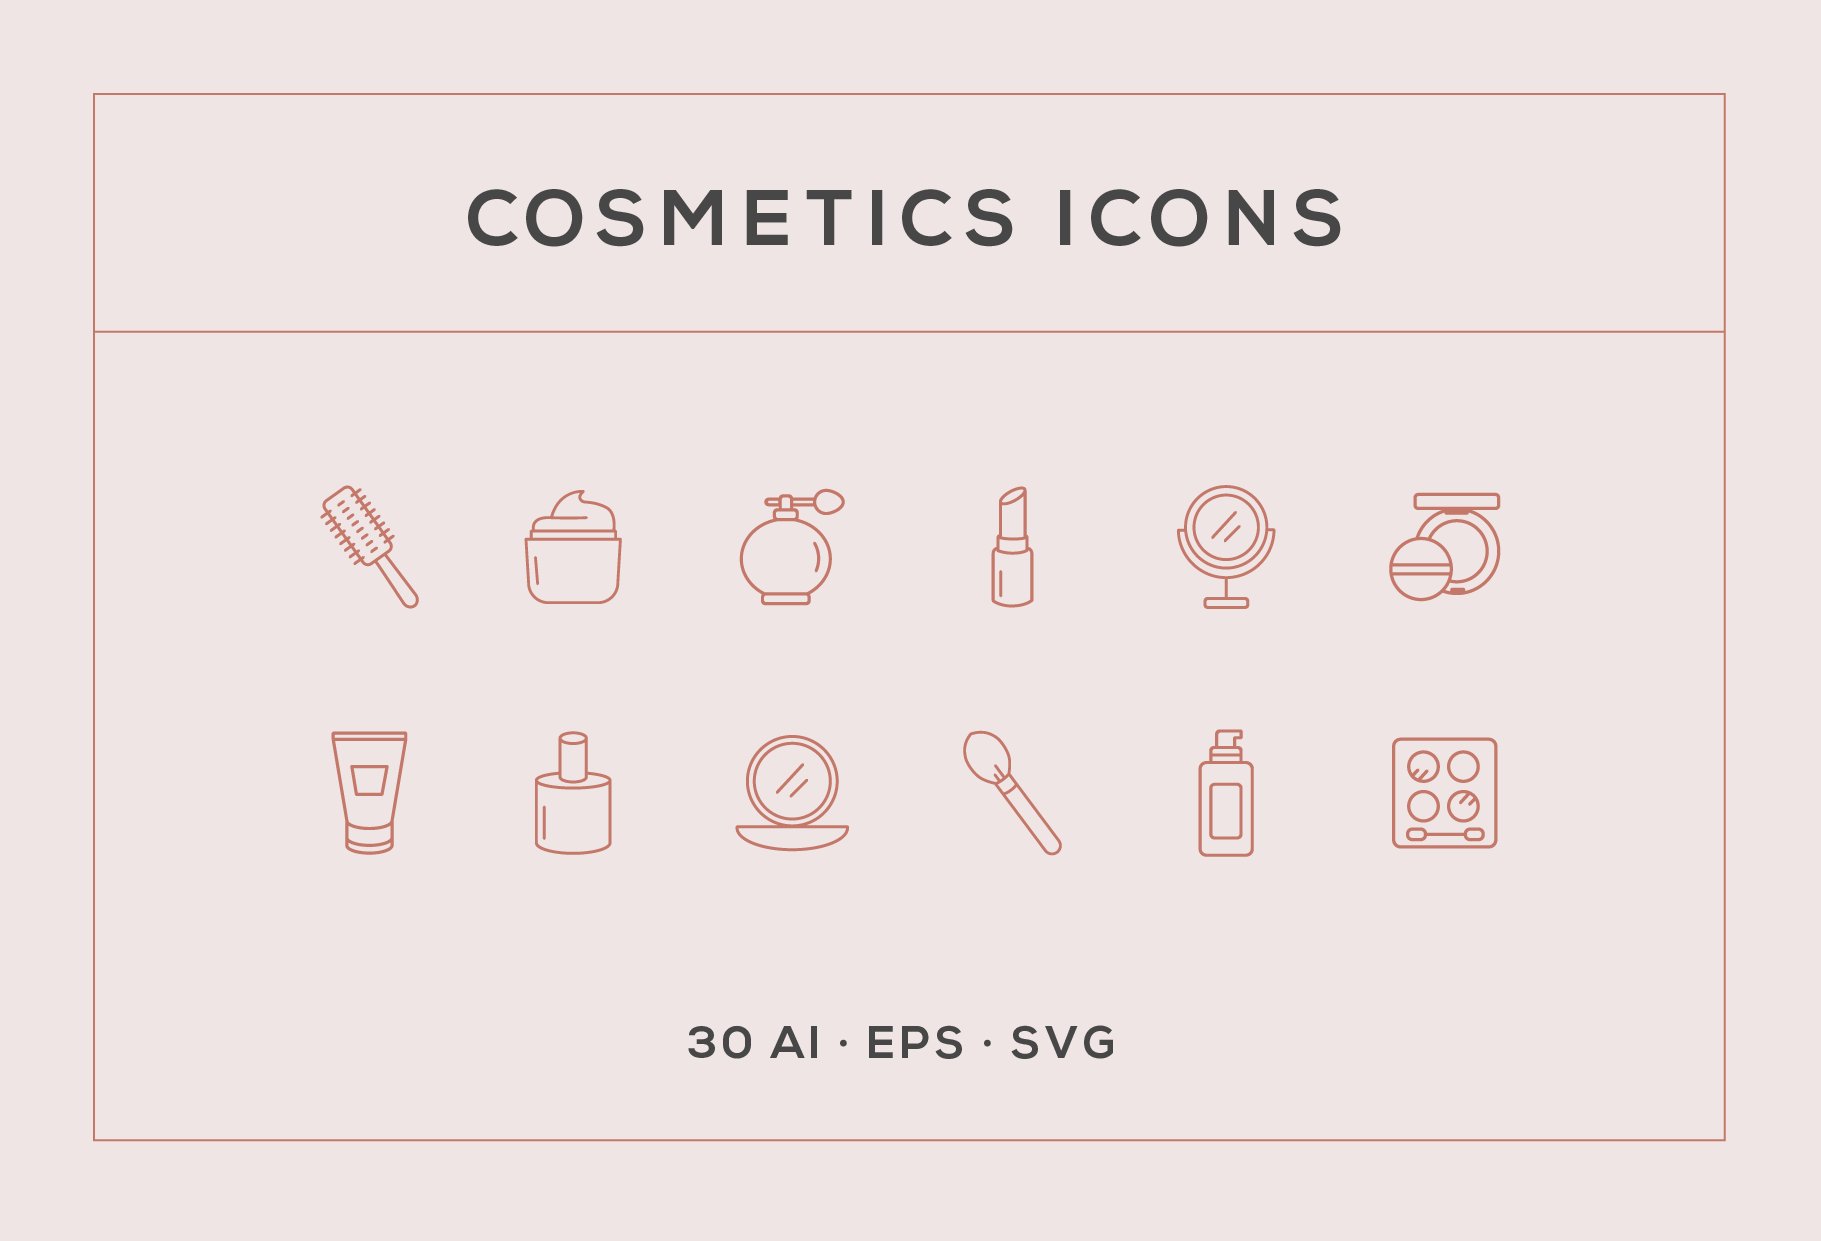 Cosmetics Line Icons cover image.